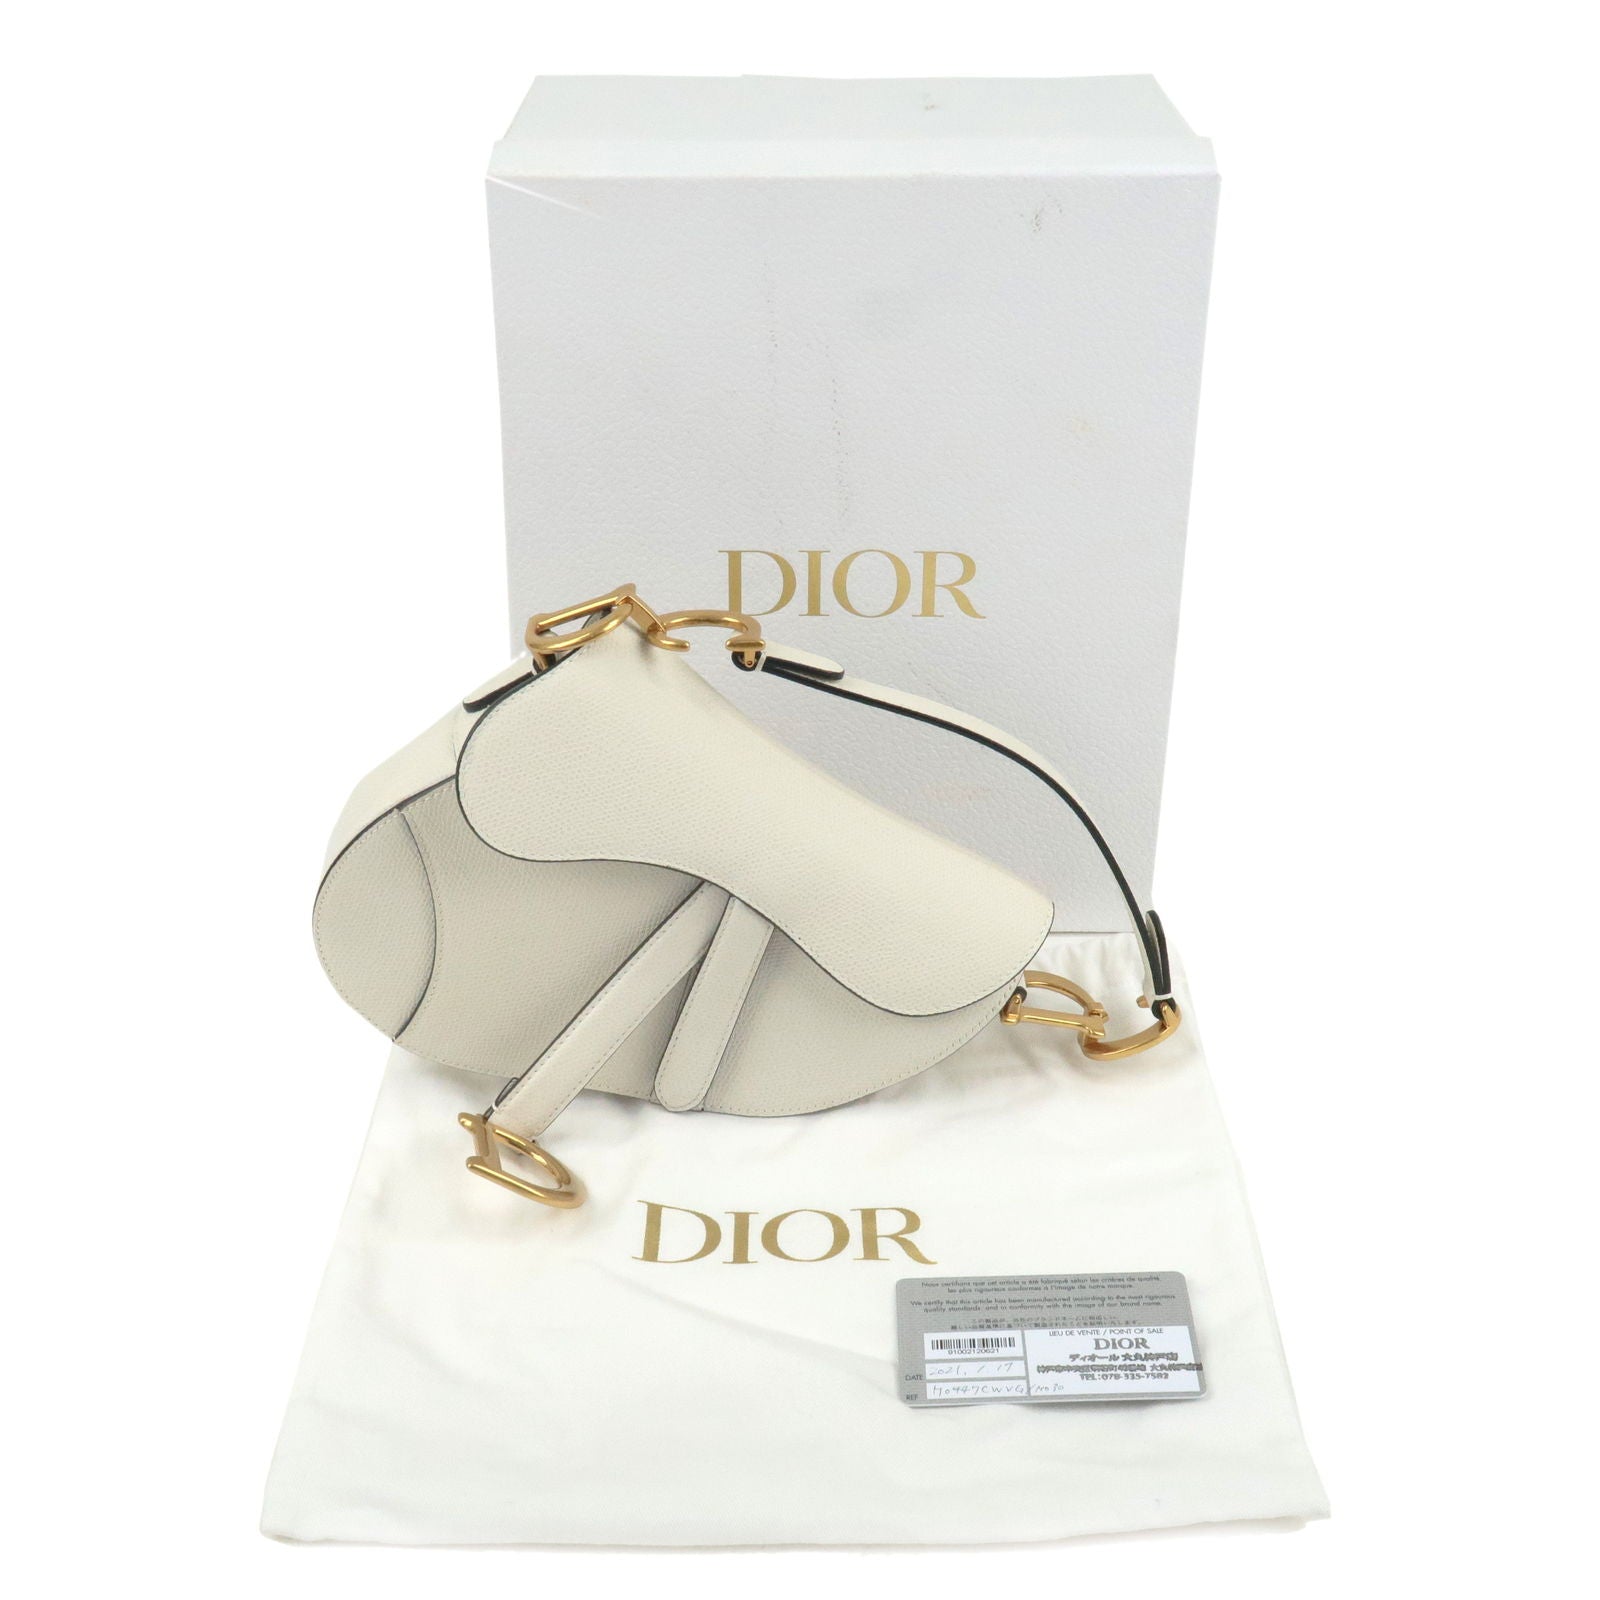 Dior Saddle White Bags & Handbags for Women for sale